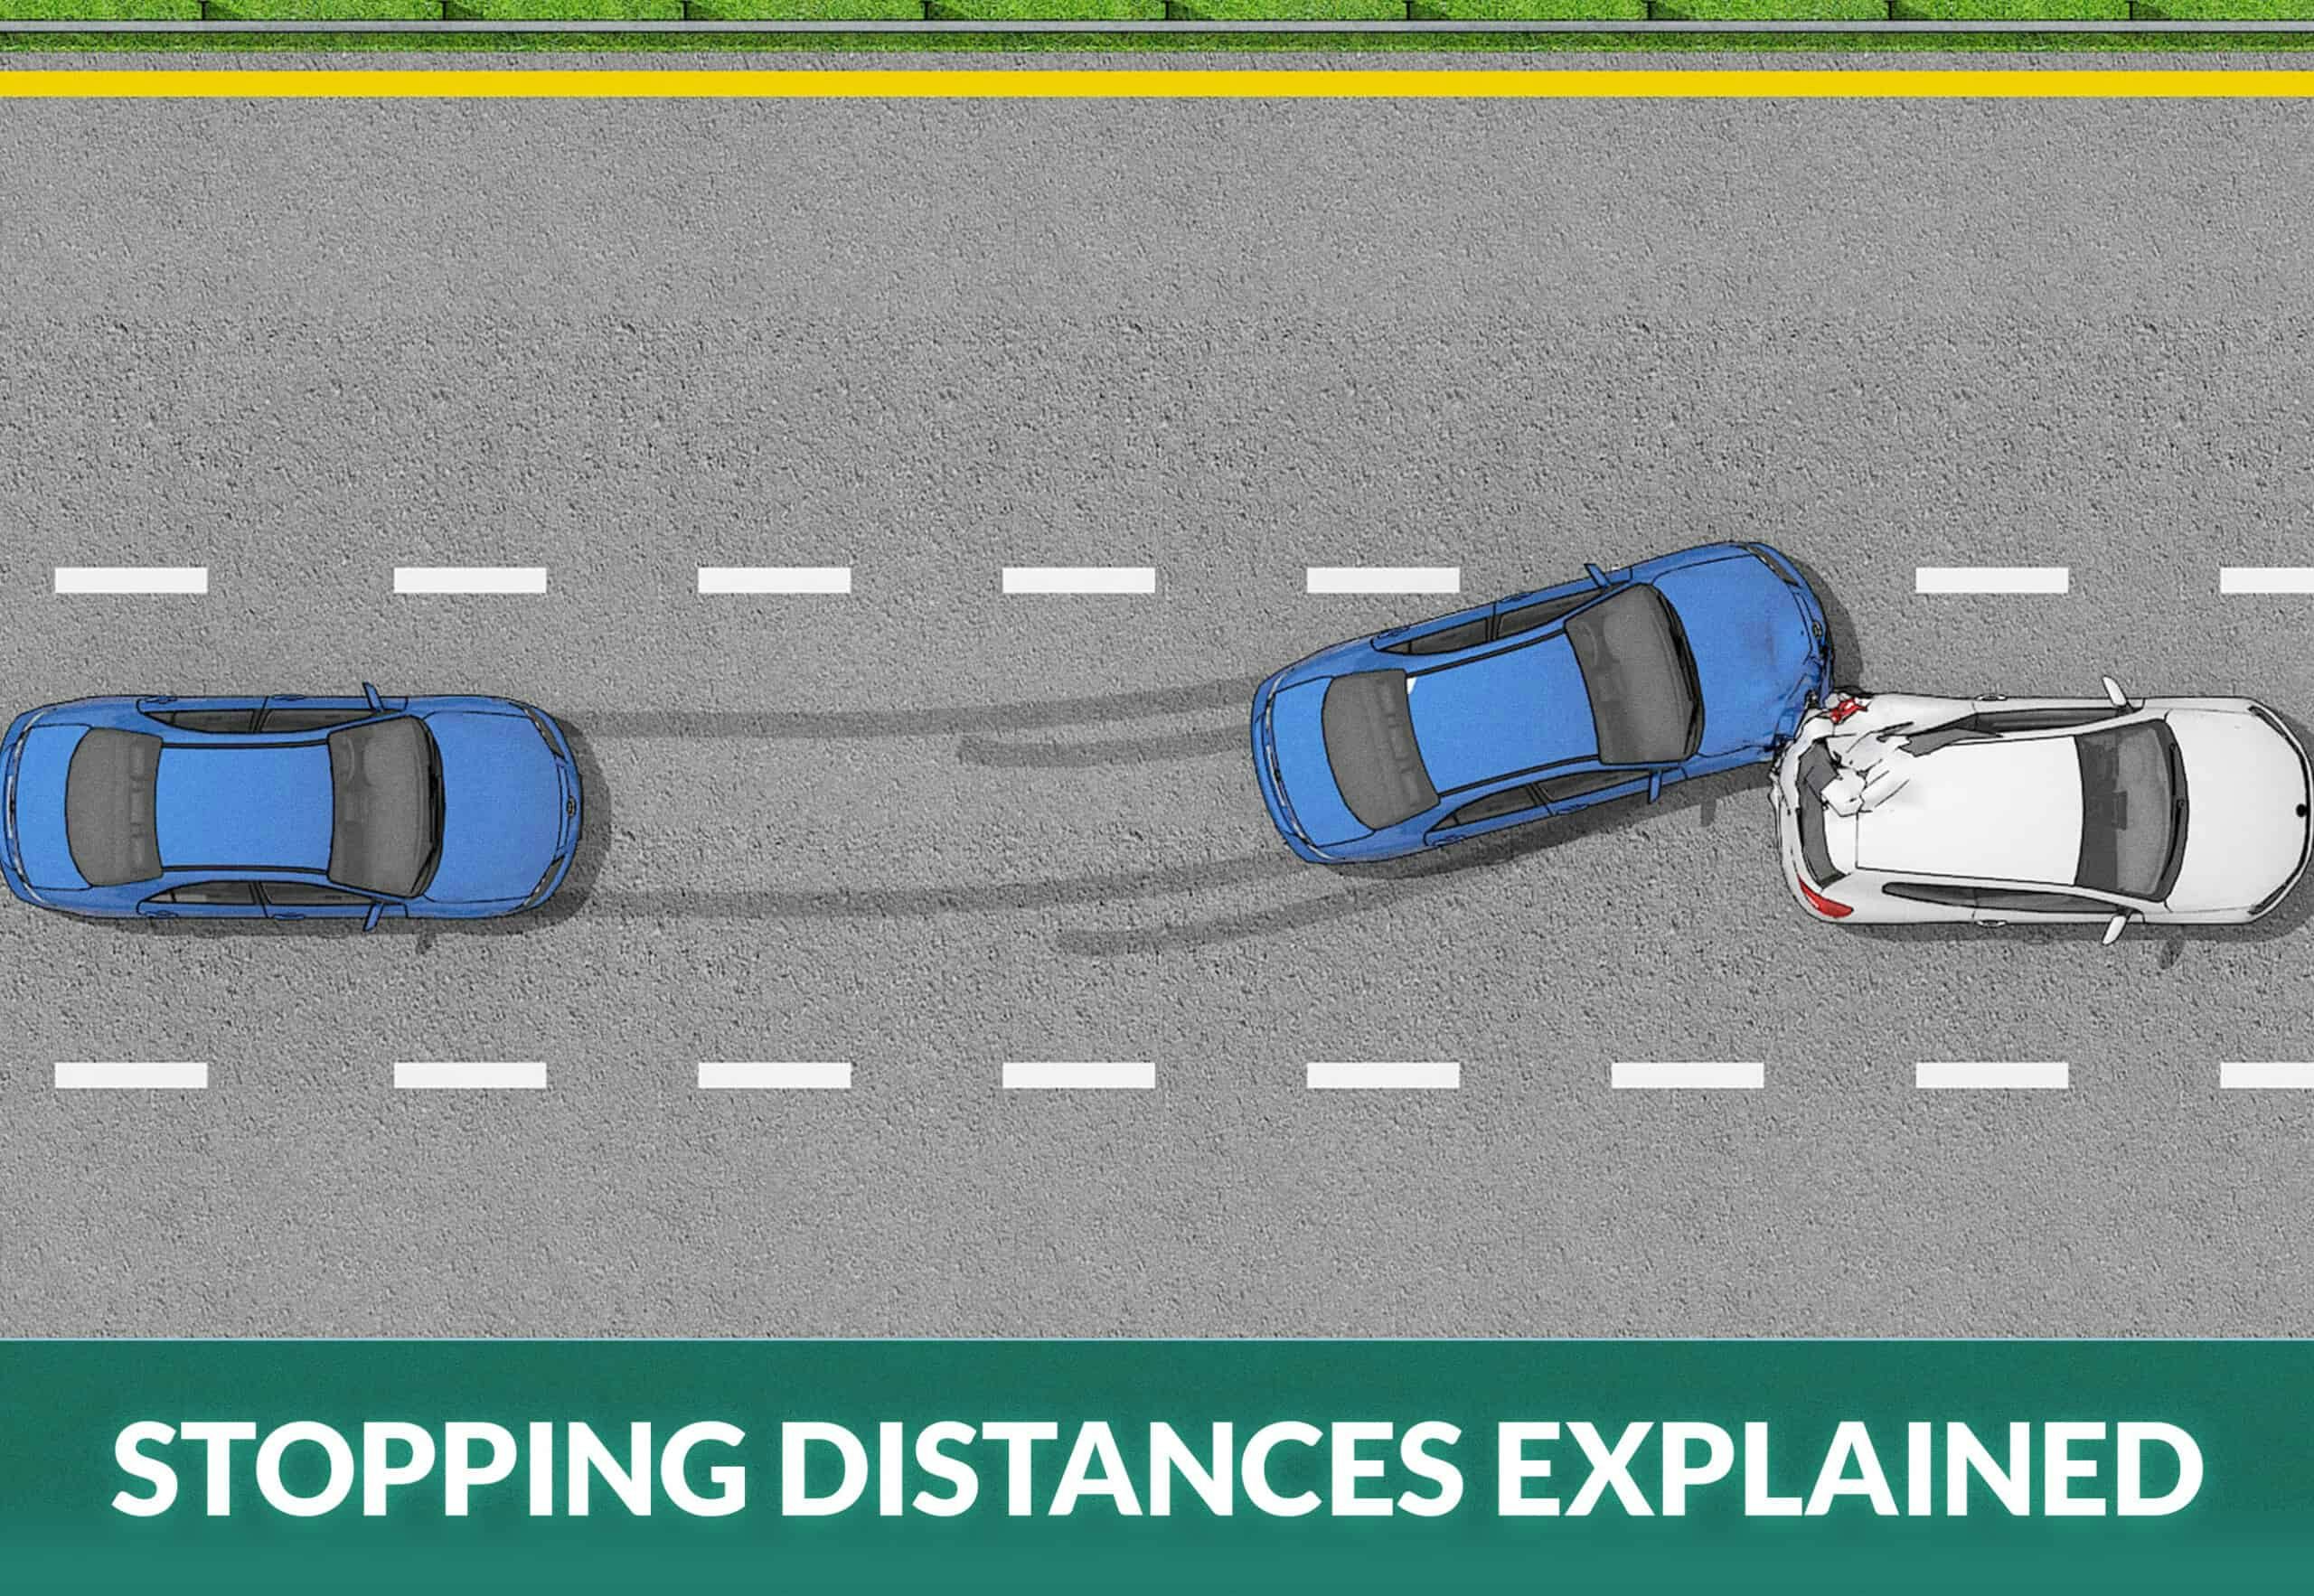 How to Brake and Stop a Car in the Shortest Distance: 9 Steps